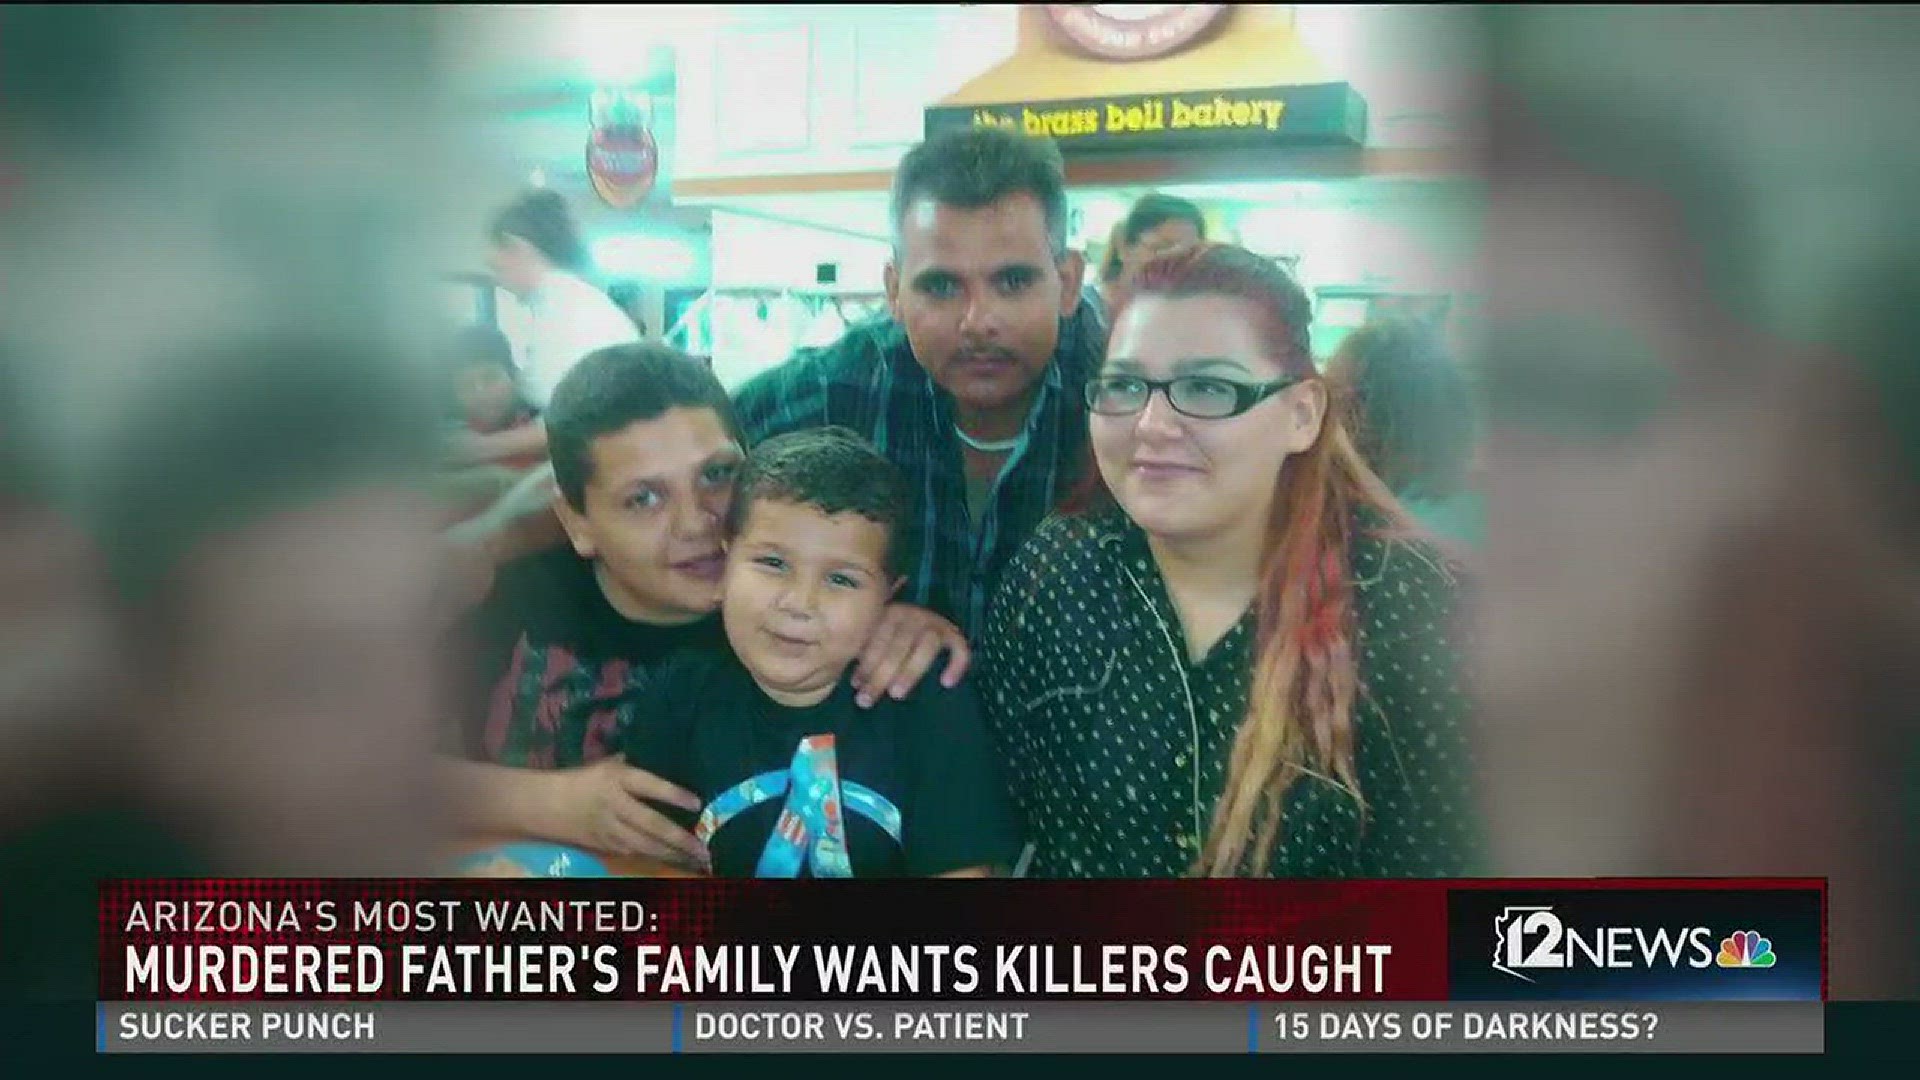 Jose Sanchez was minding his own business when he was shot and killed last year after four men broke into his home.